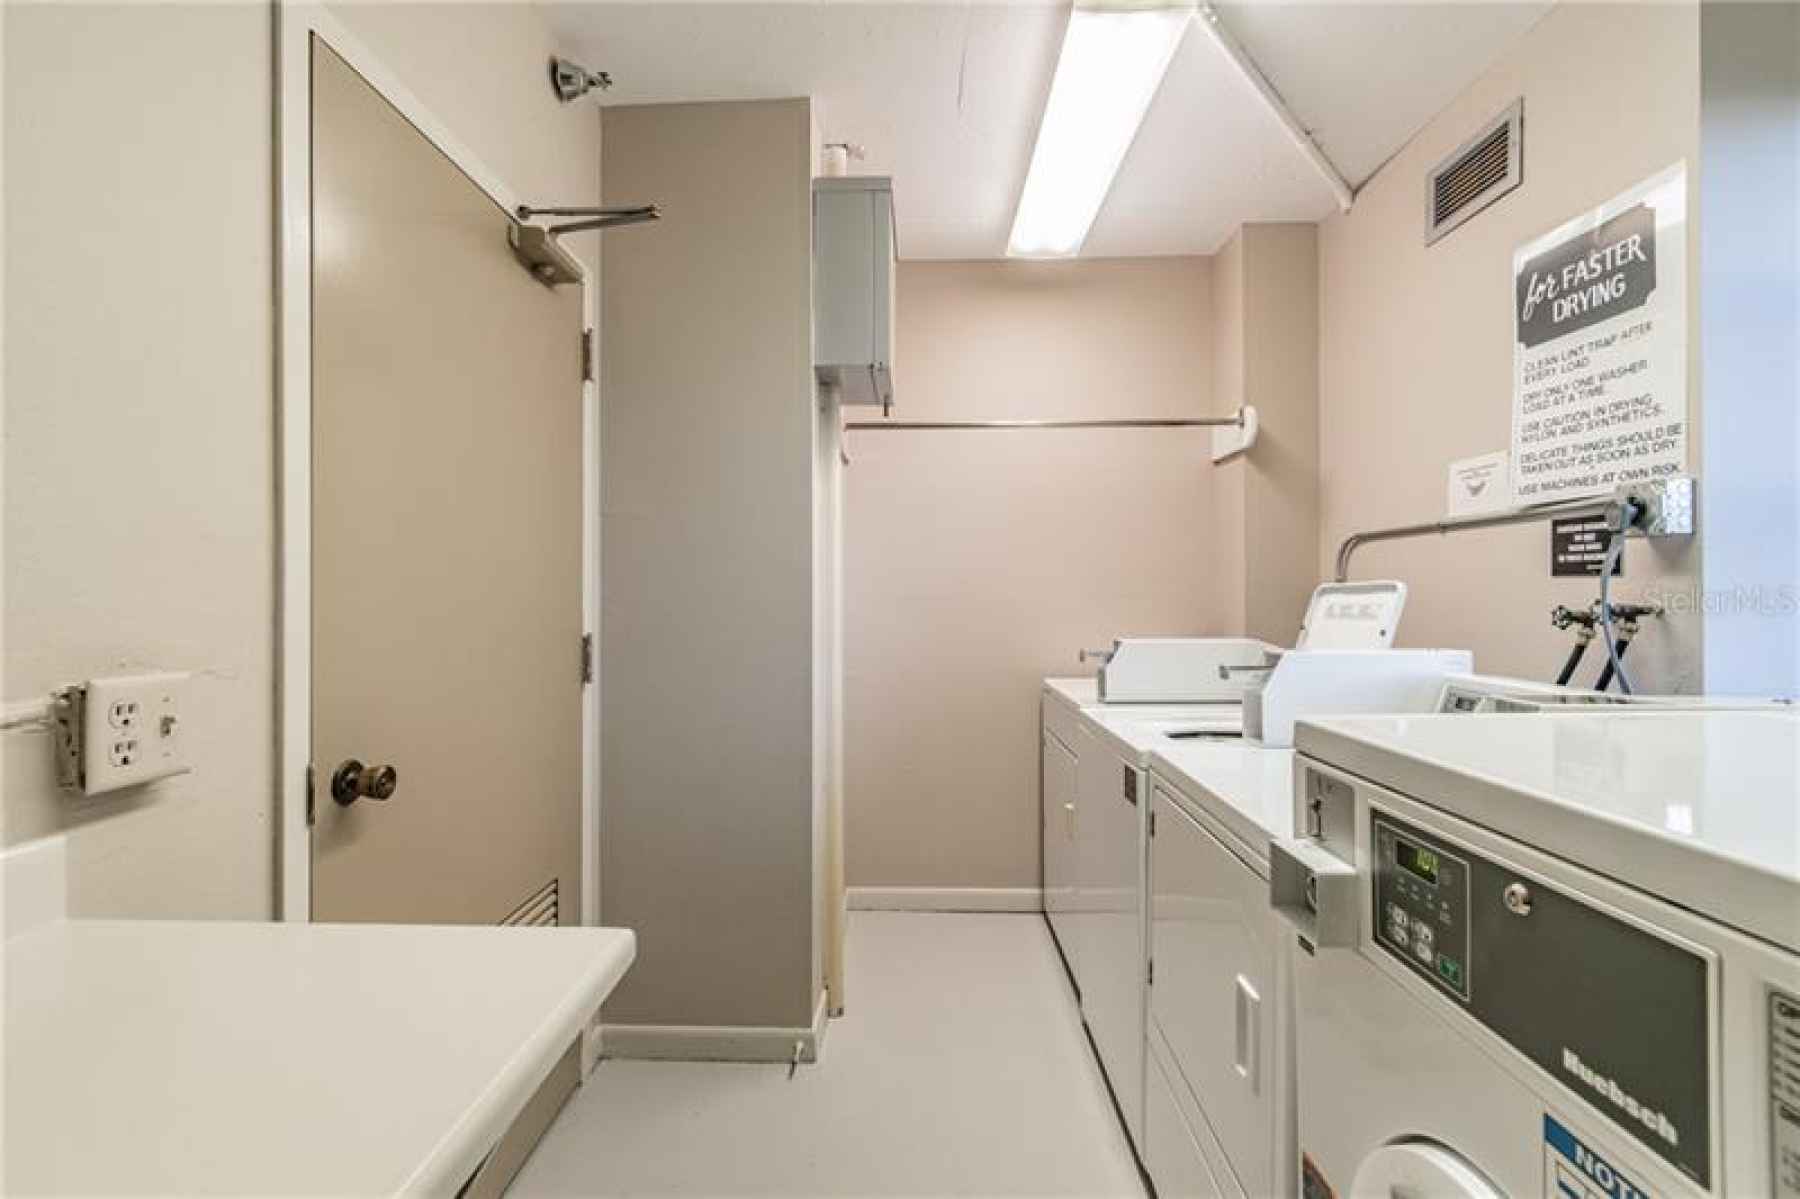 Well kept and maintained laundry facilities